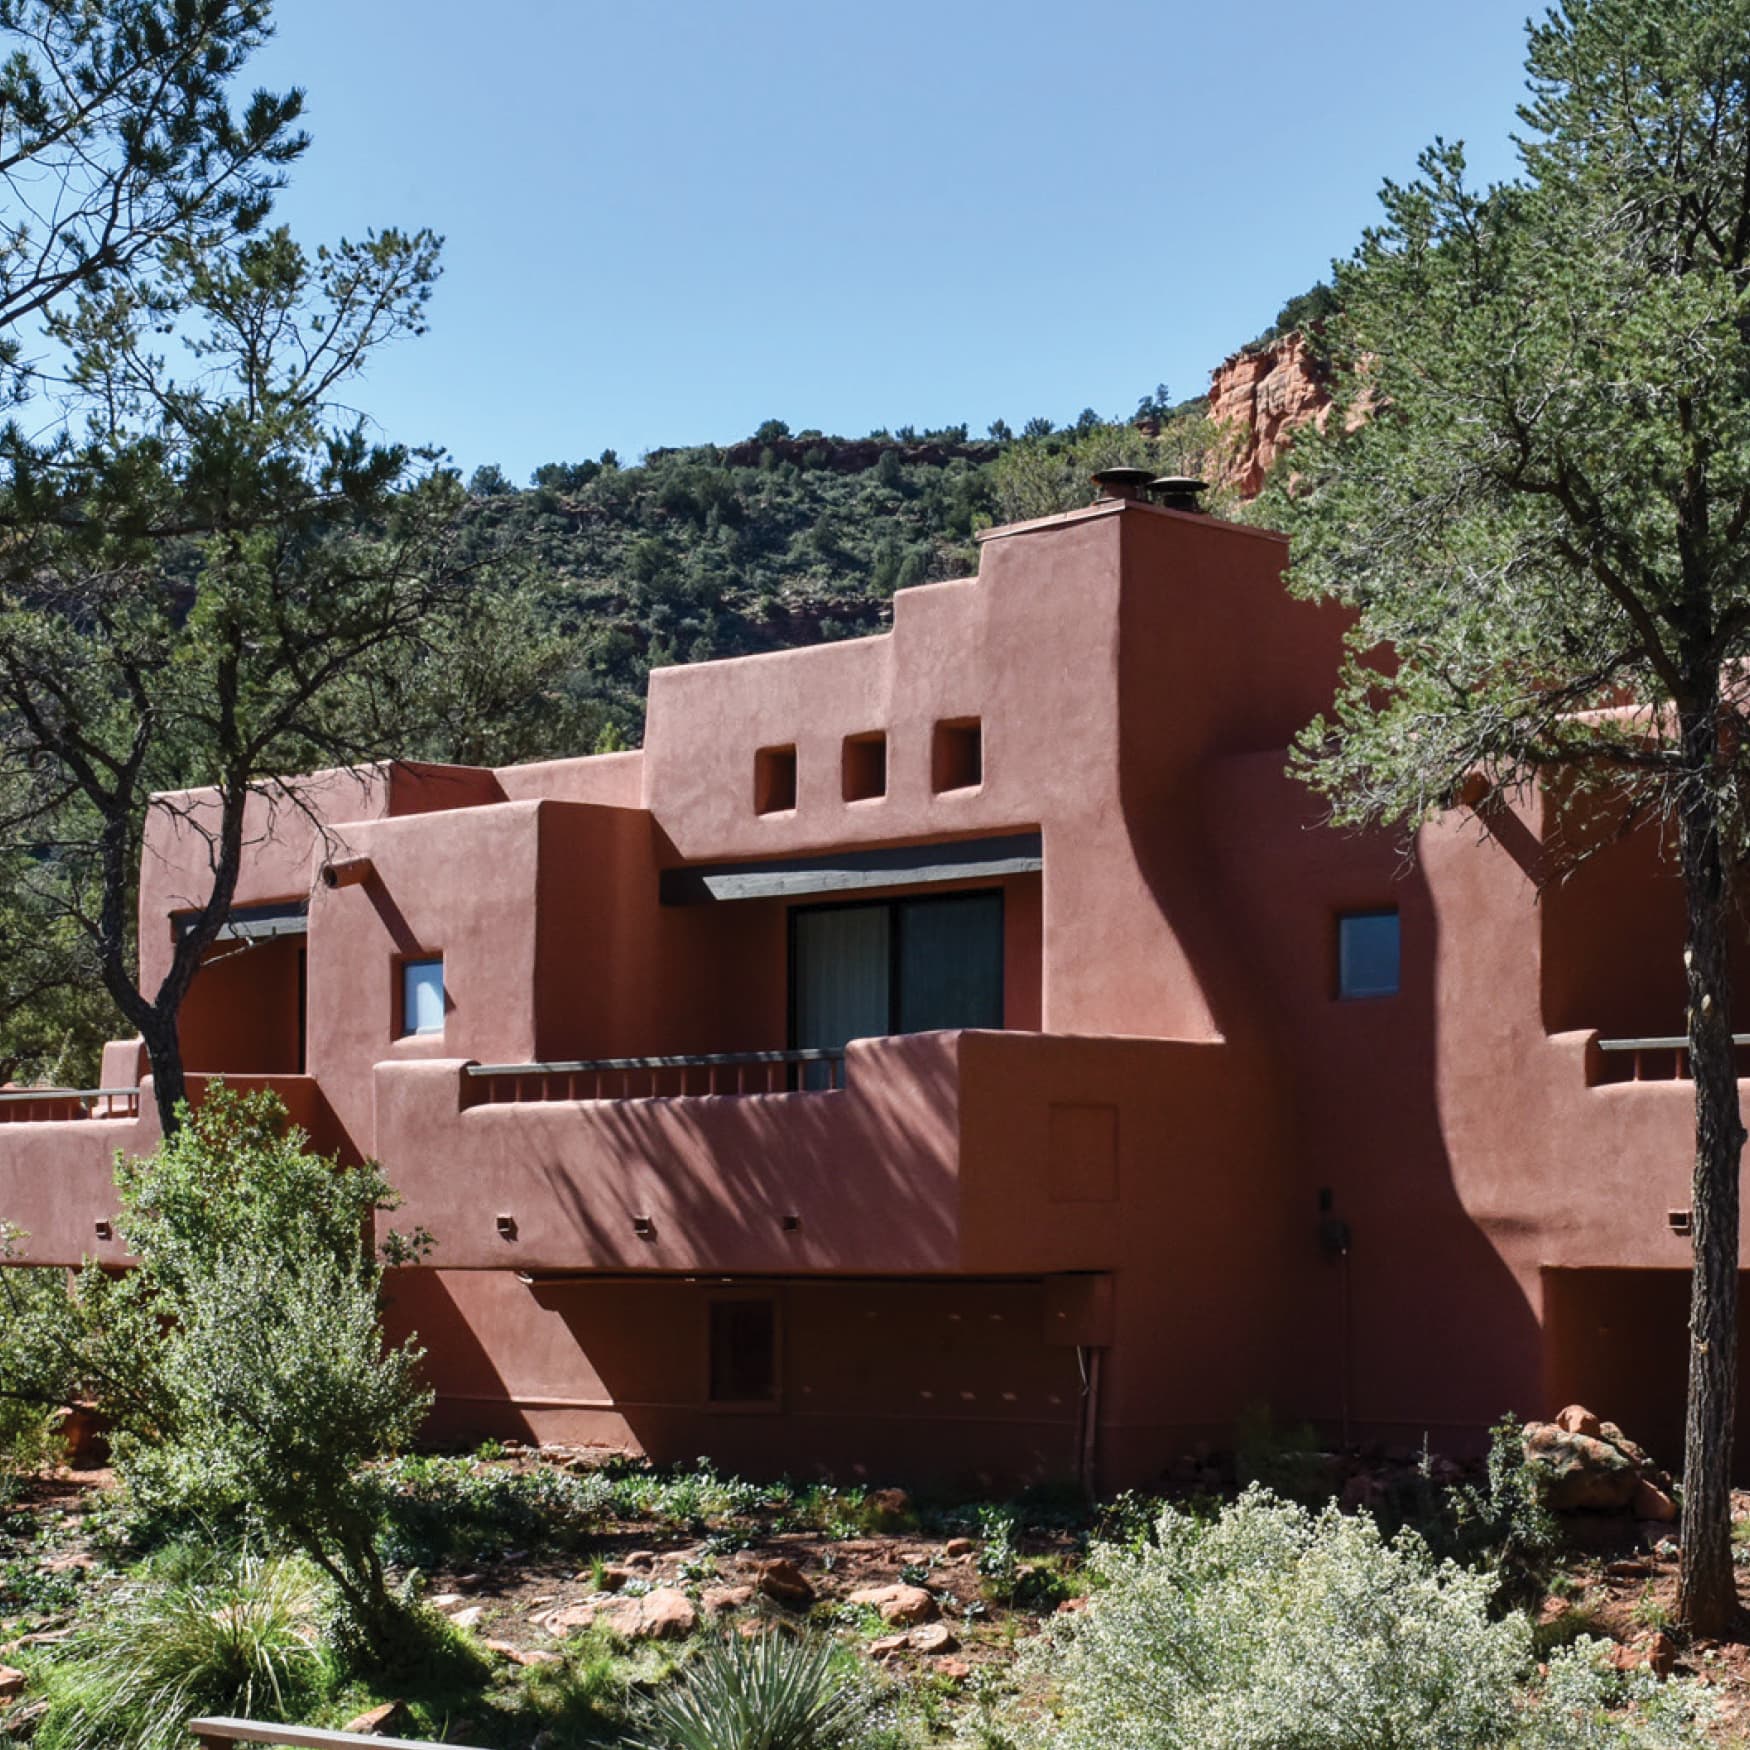 Image of the architecture at the Enchantment Resort in Sedona, Arizona. 